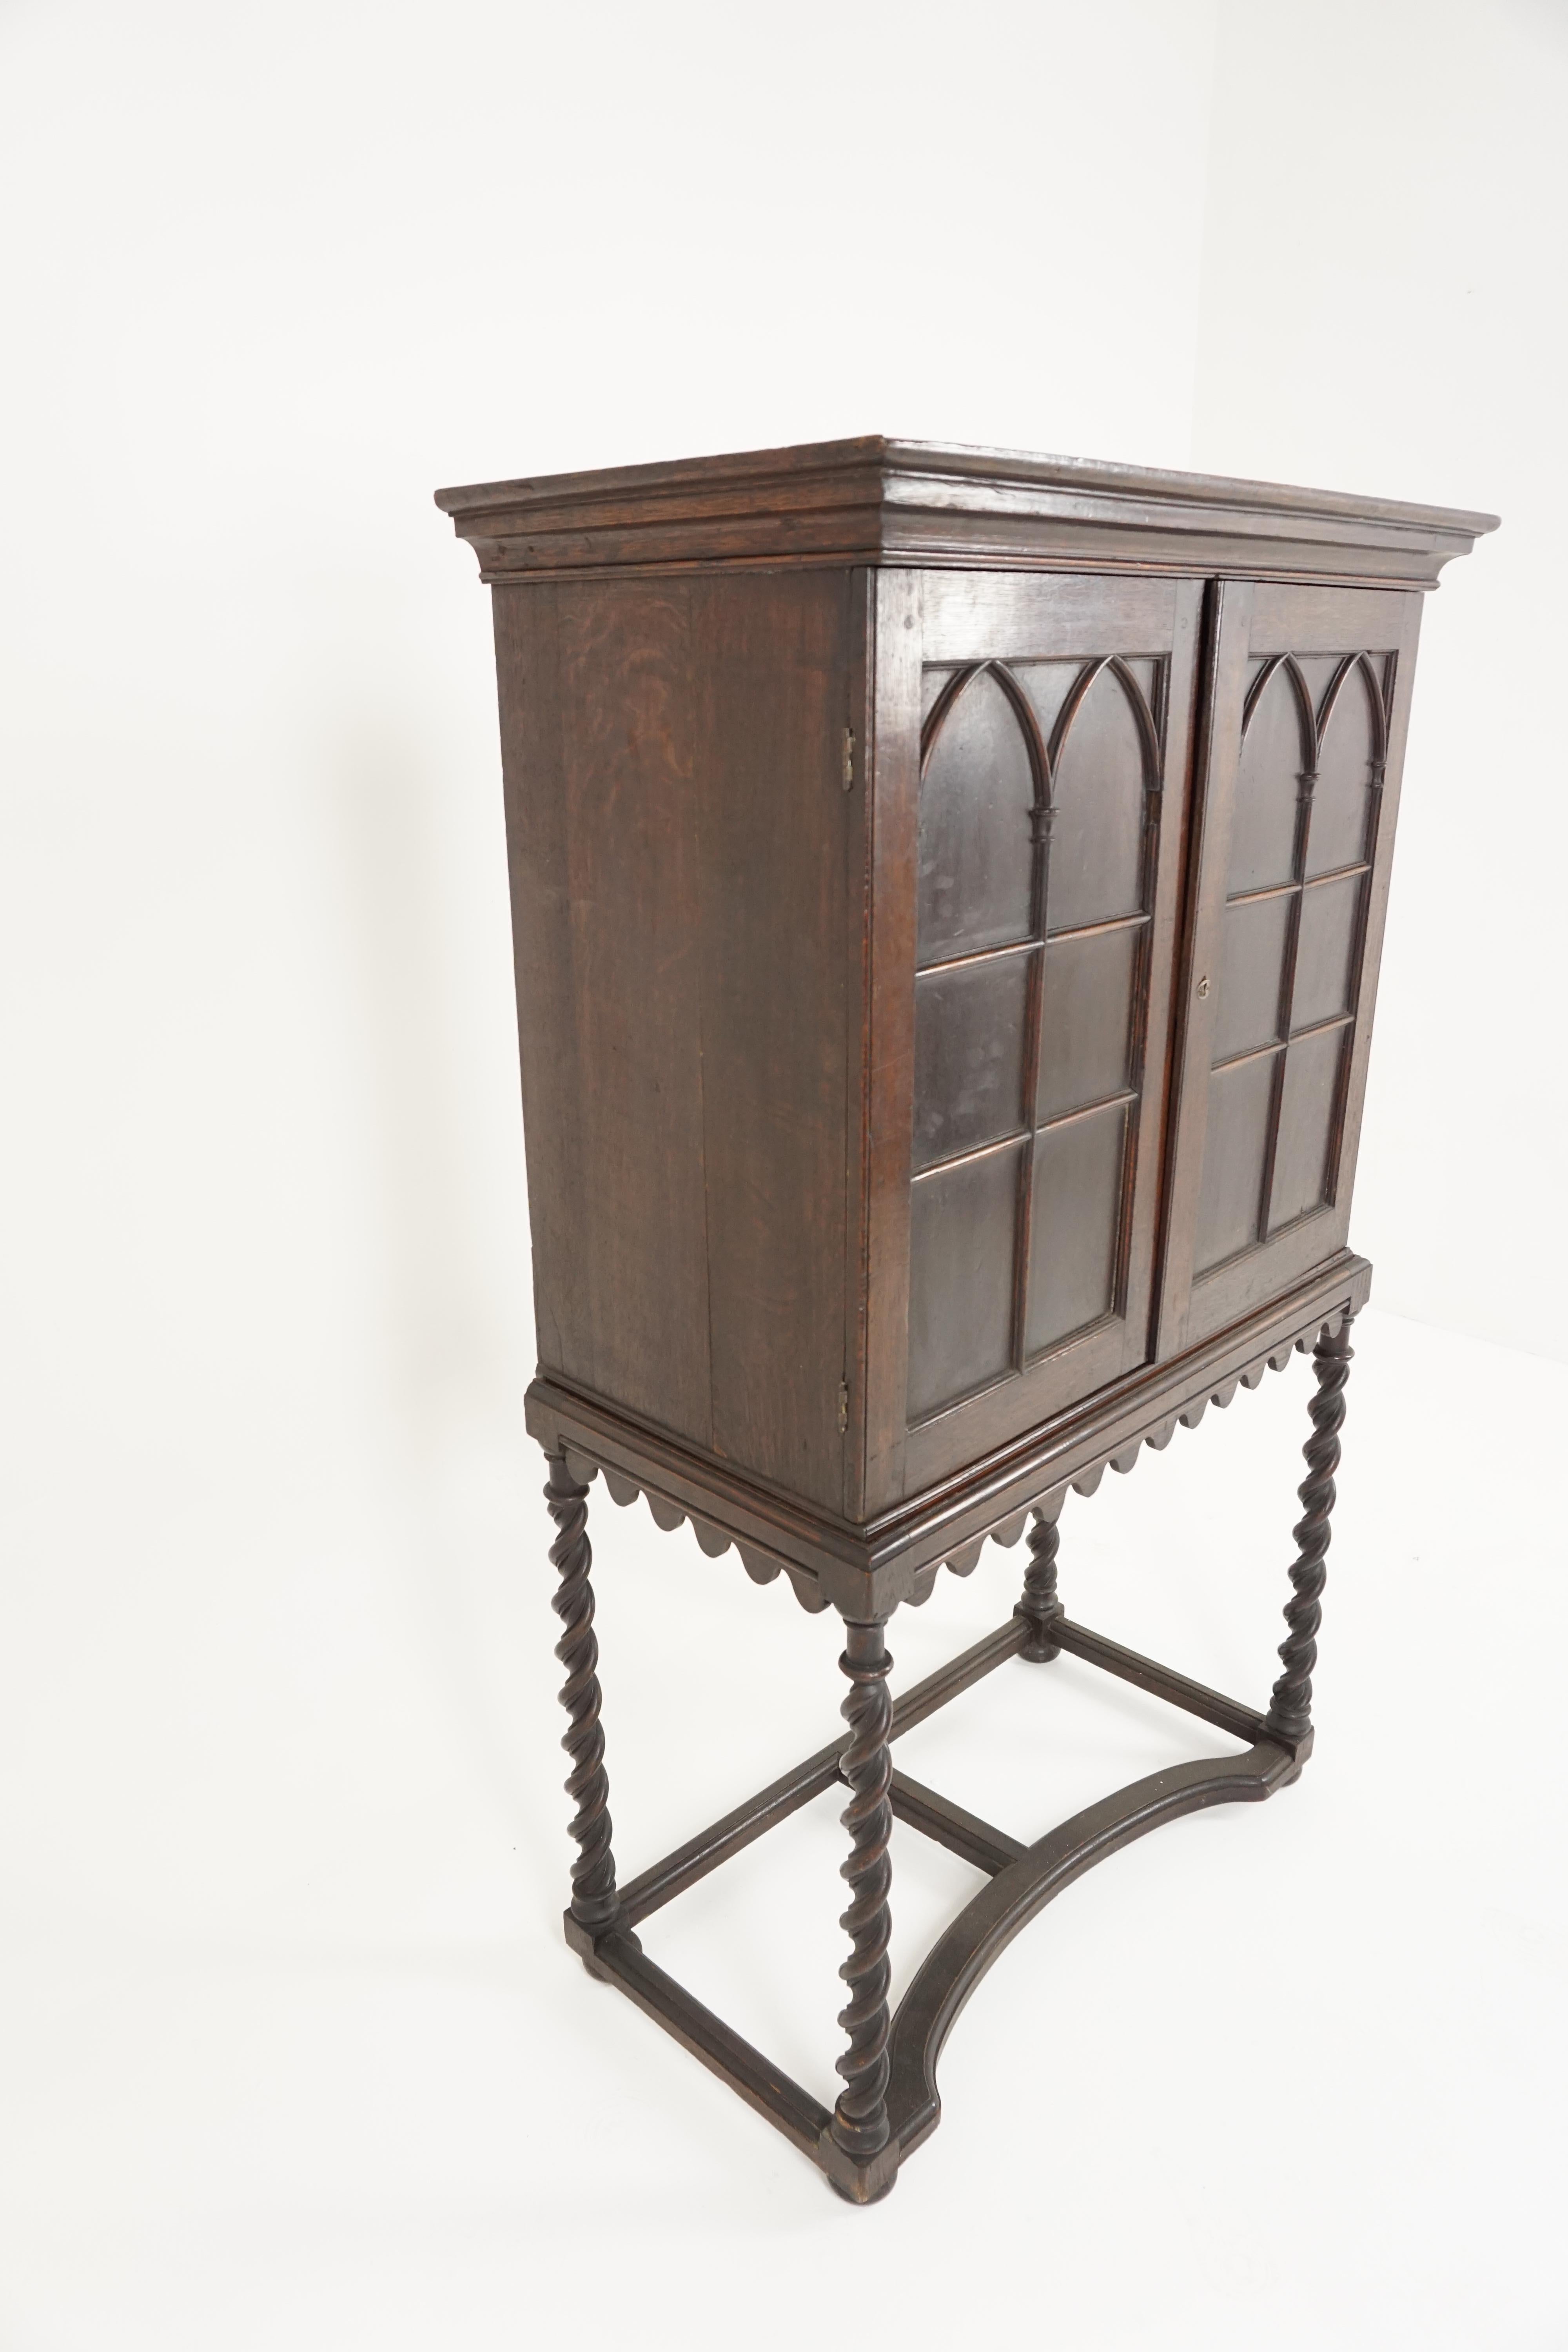  Antique Gothic Cabinet, Early 19th Century Carved Oak, Scotland 1810, B1803 3